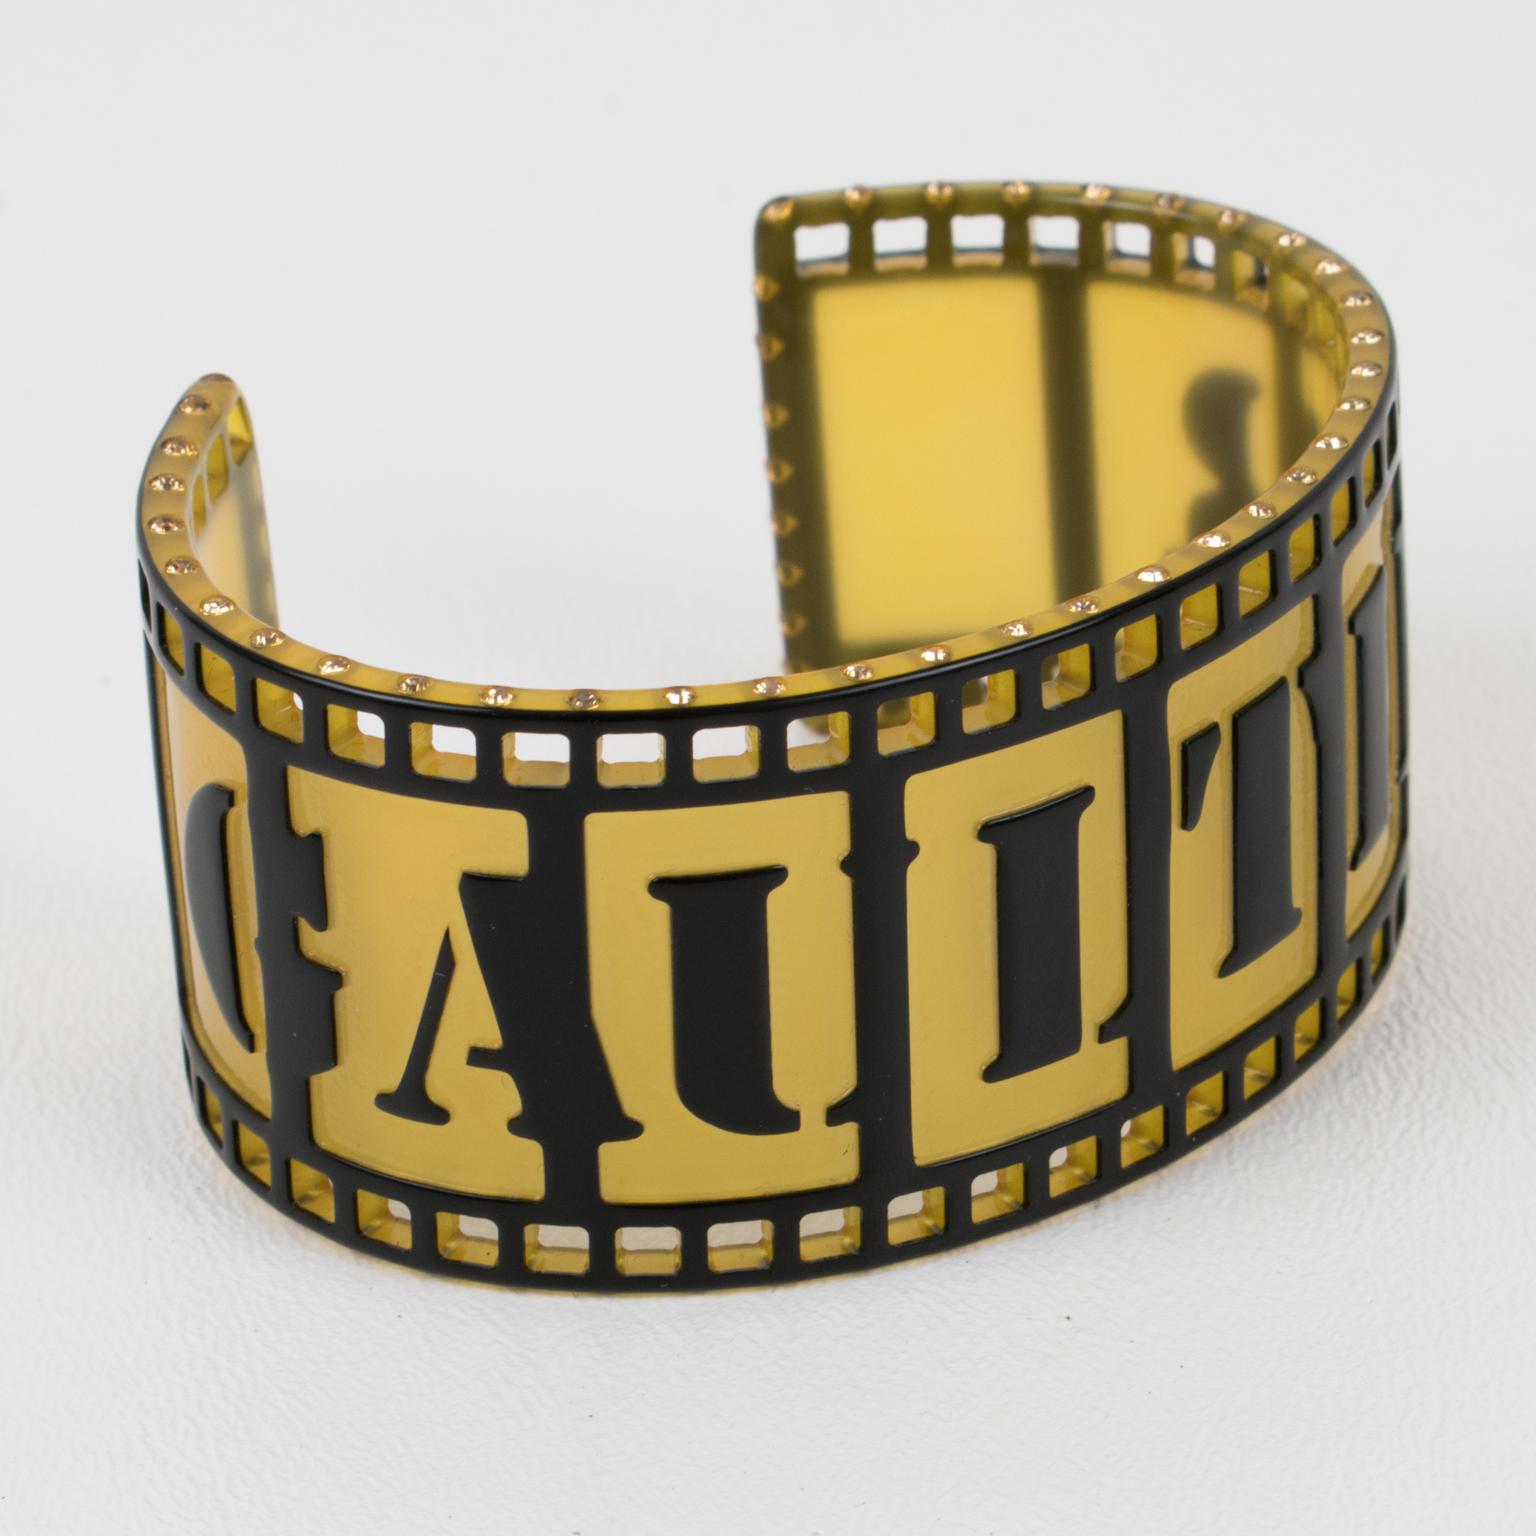 Jean Paul Gaultier Runway Black and Yellow Resin Cuff Bracelet Old Film Strip In Excellent Condition For Sale In Atlanta, GA